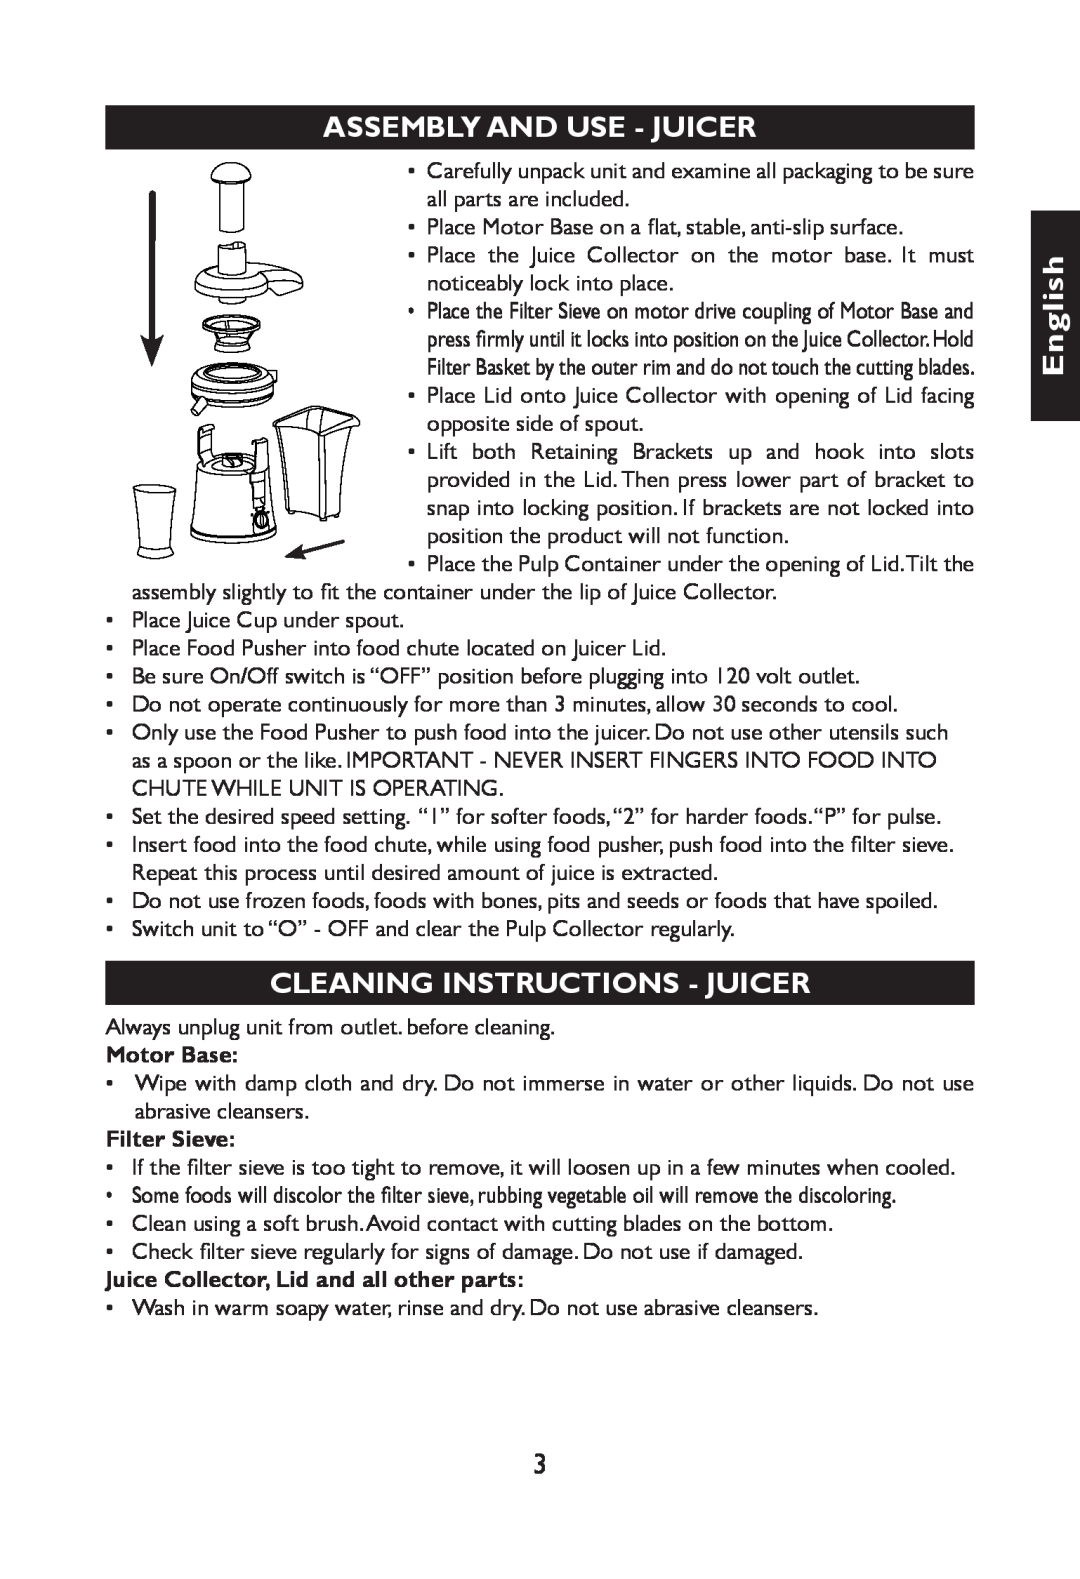 Nesco JB-50 manual Assembly And Use- Juicer, Cleaning Instructions - Juicer, English, Motor Base, Filter Sieve 